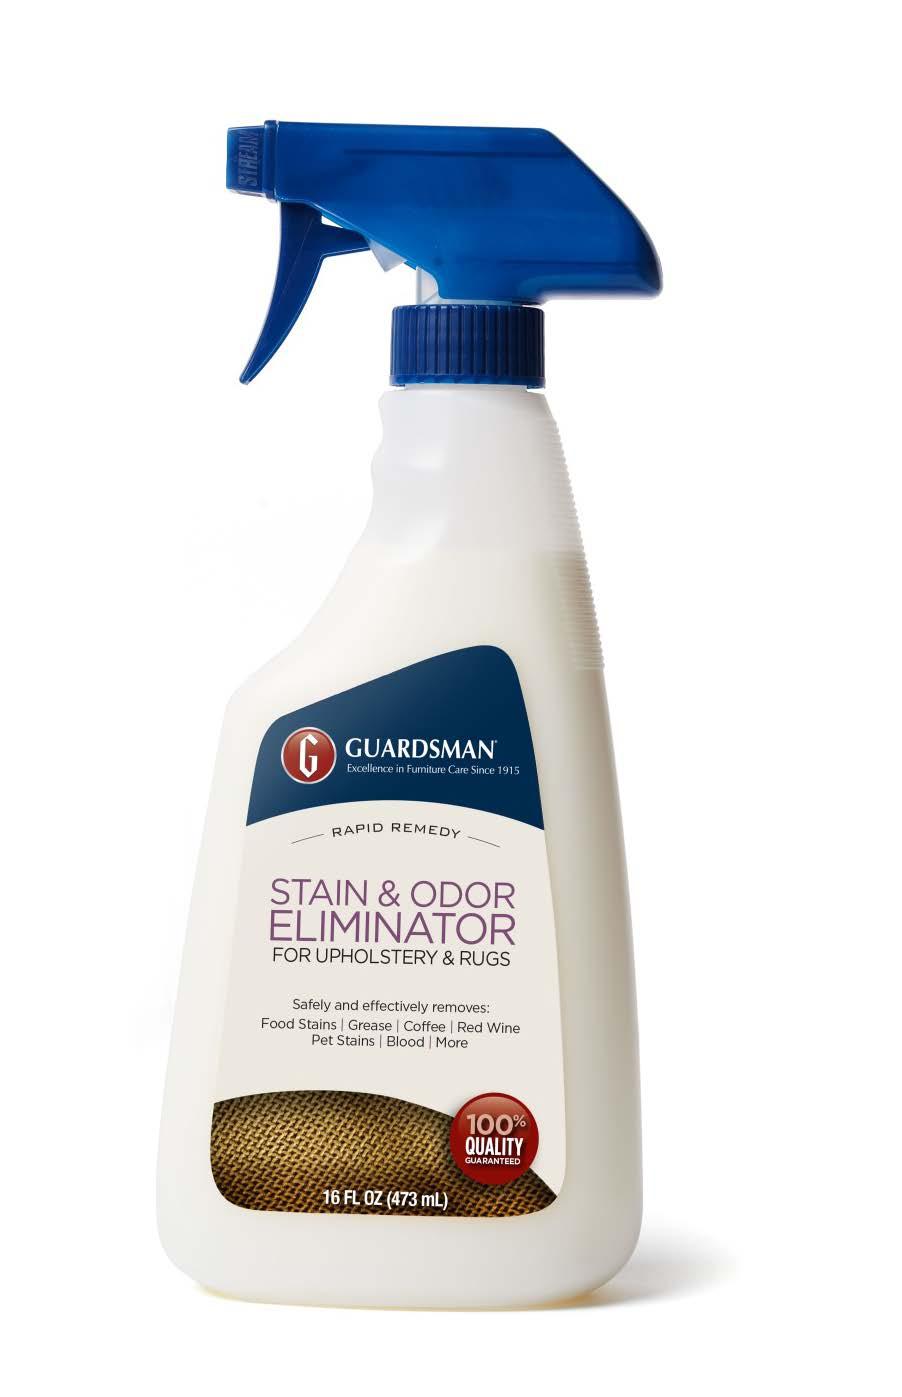 Guardsman STAIN & ODOR ELIMINATOR For Upholstery & Rugs Safely and effectively removes: Food Stains Grease Coffee Red Wine